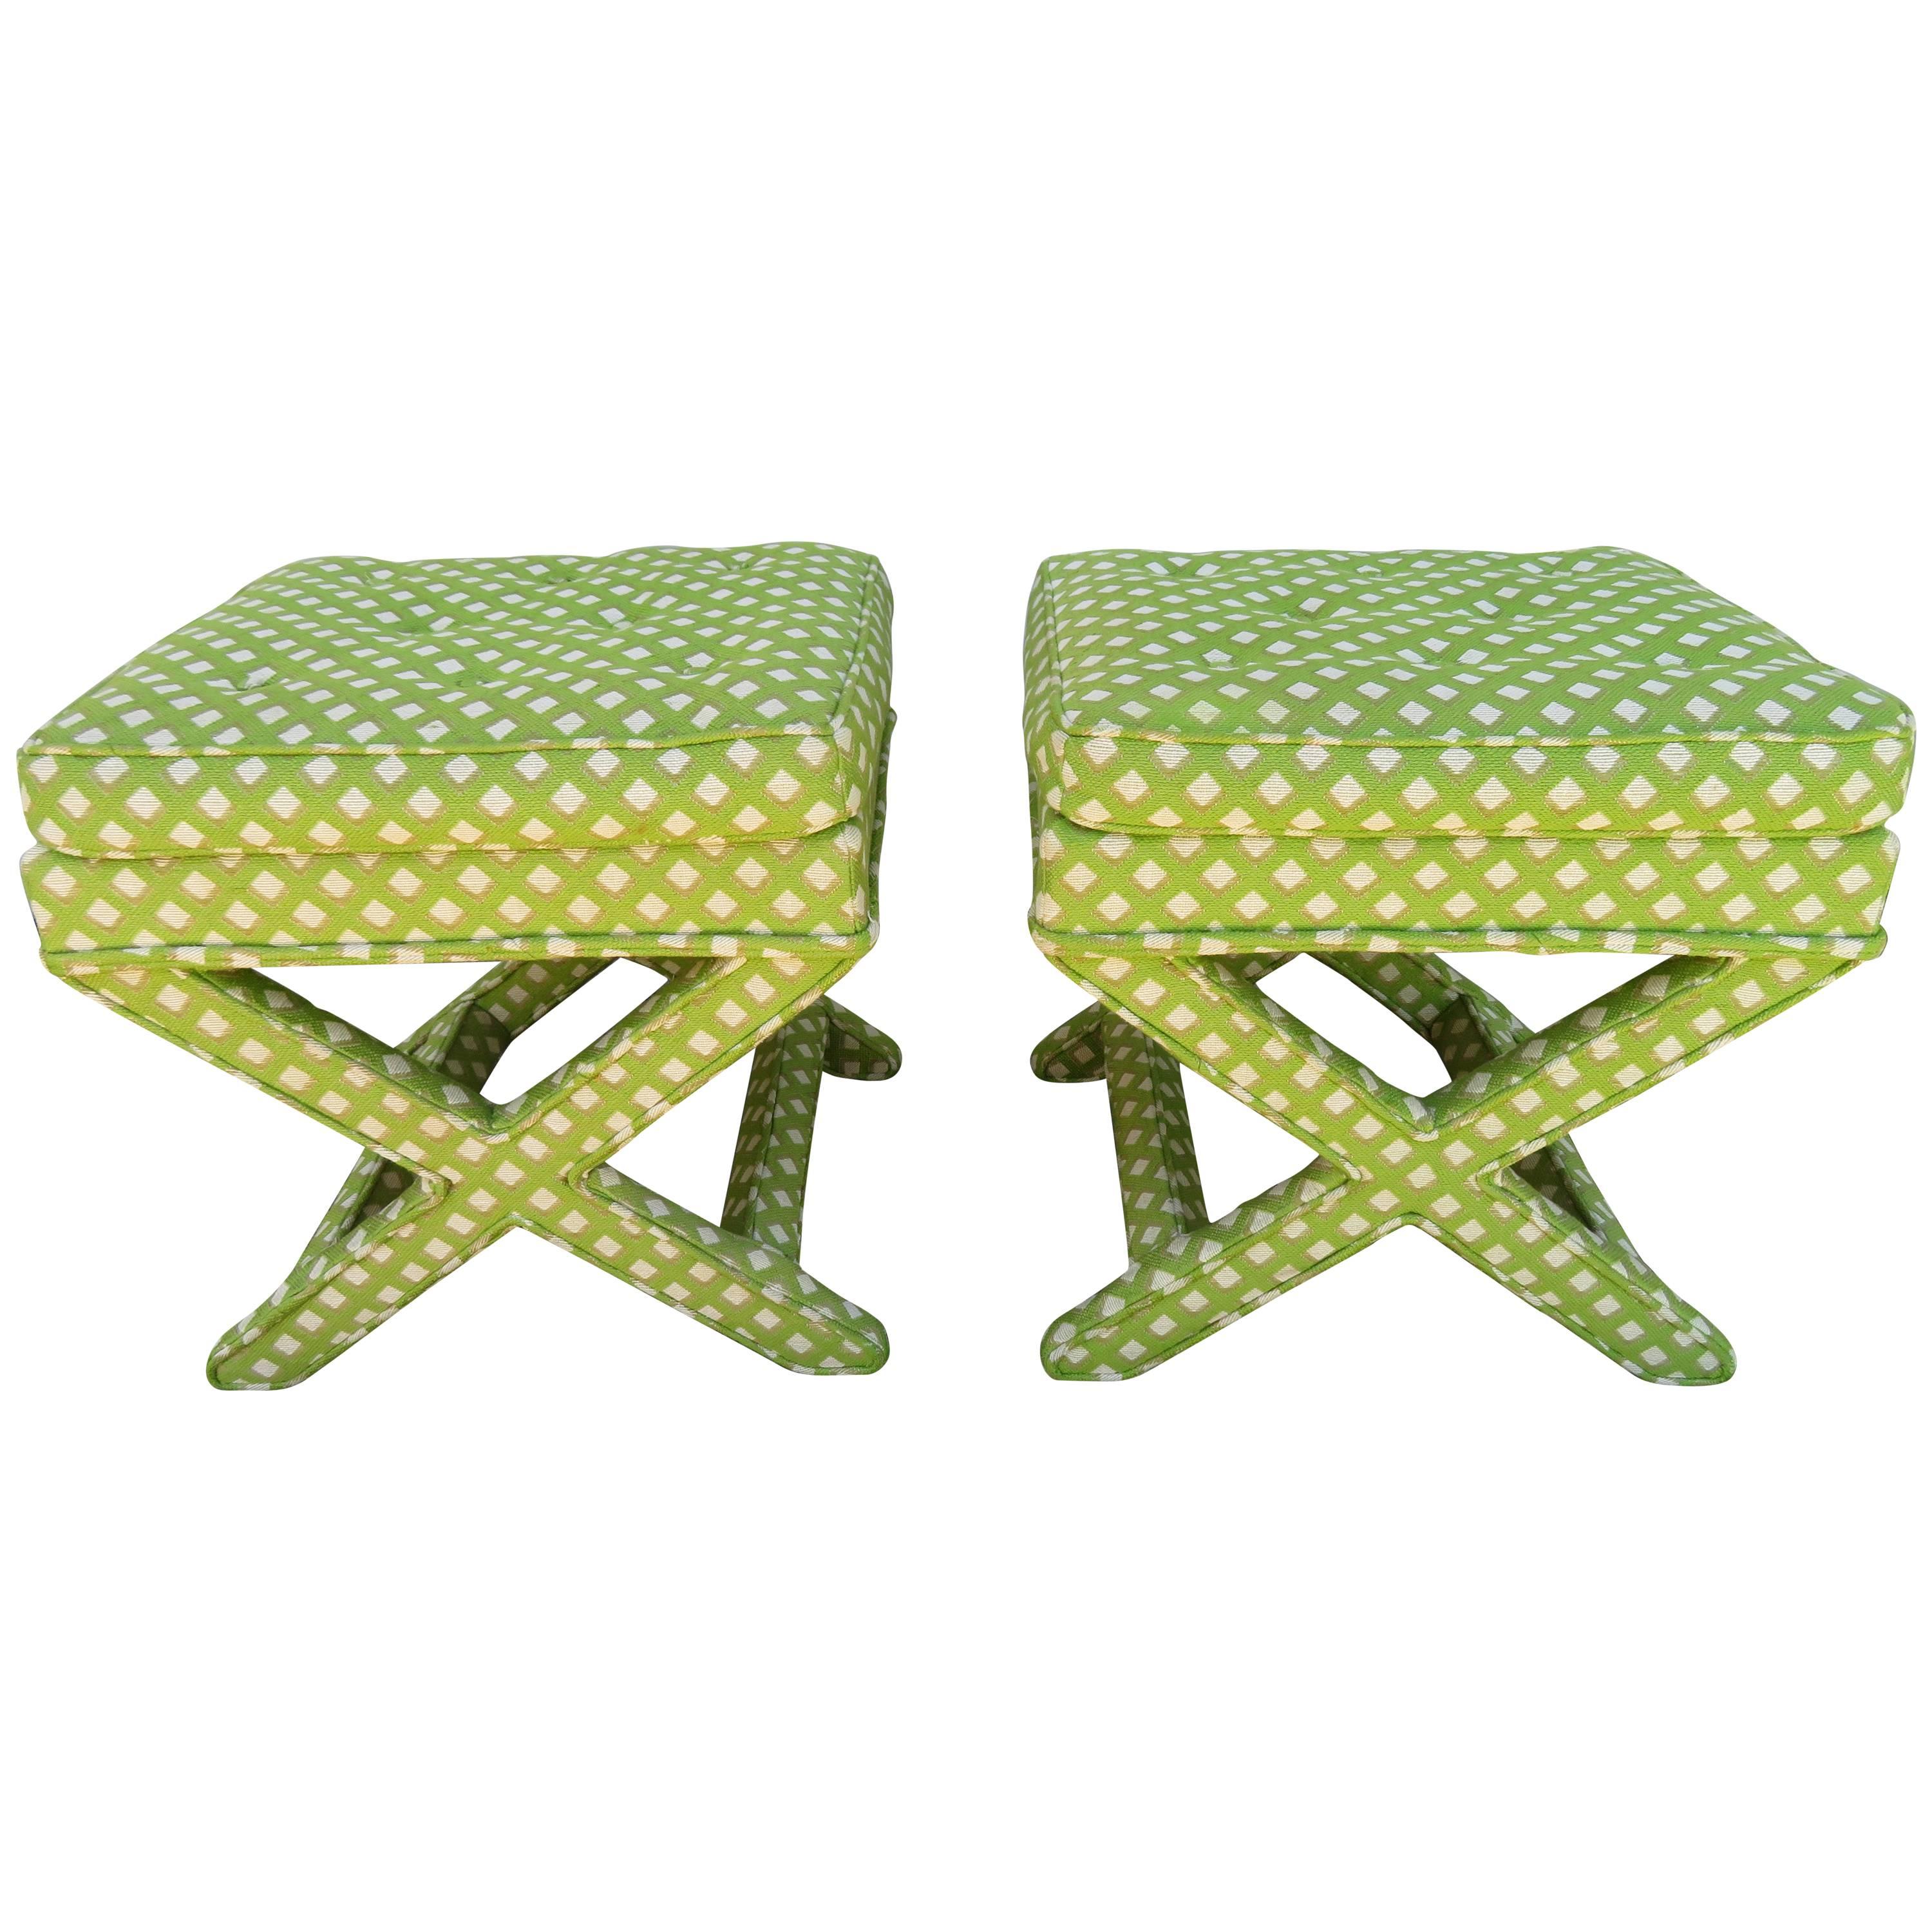 Lovely Pair of Midcentury X-Base Ottoman Stools by Billy Baldwin